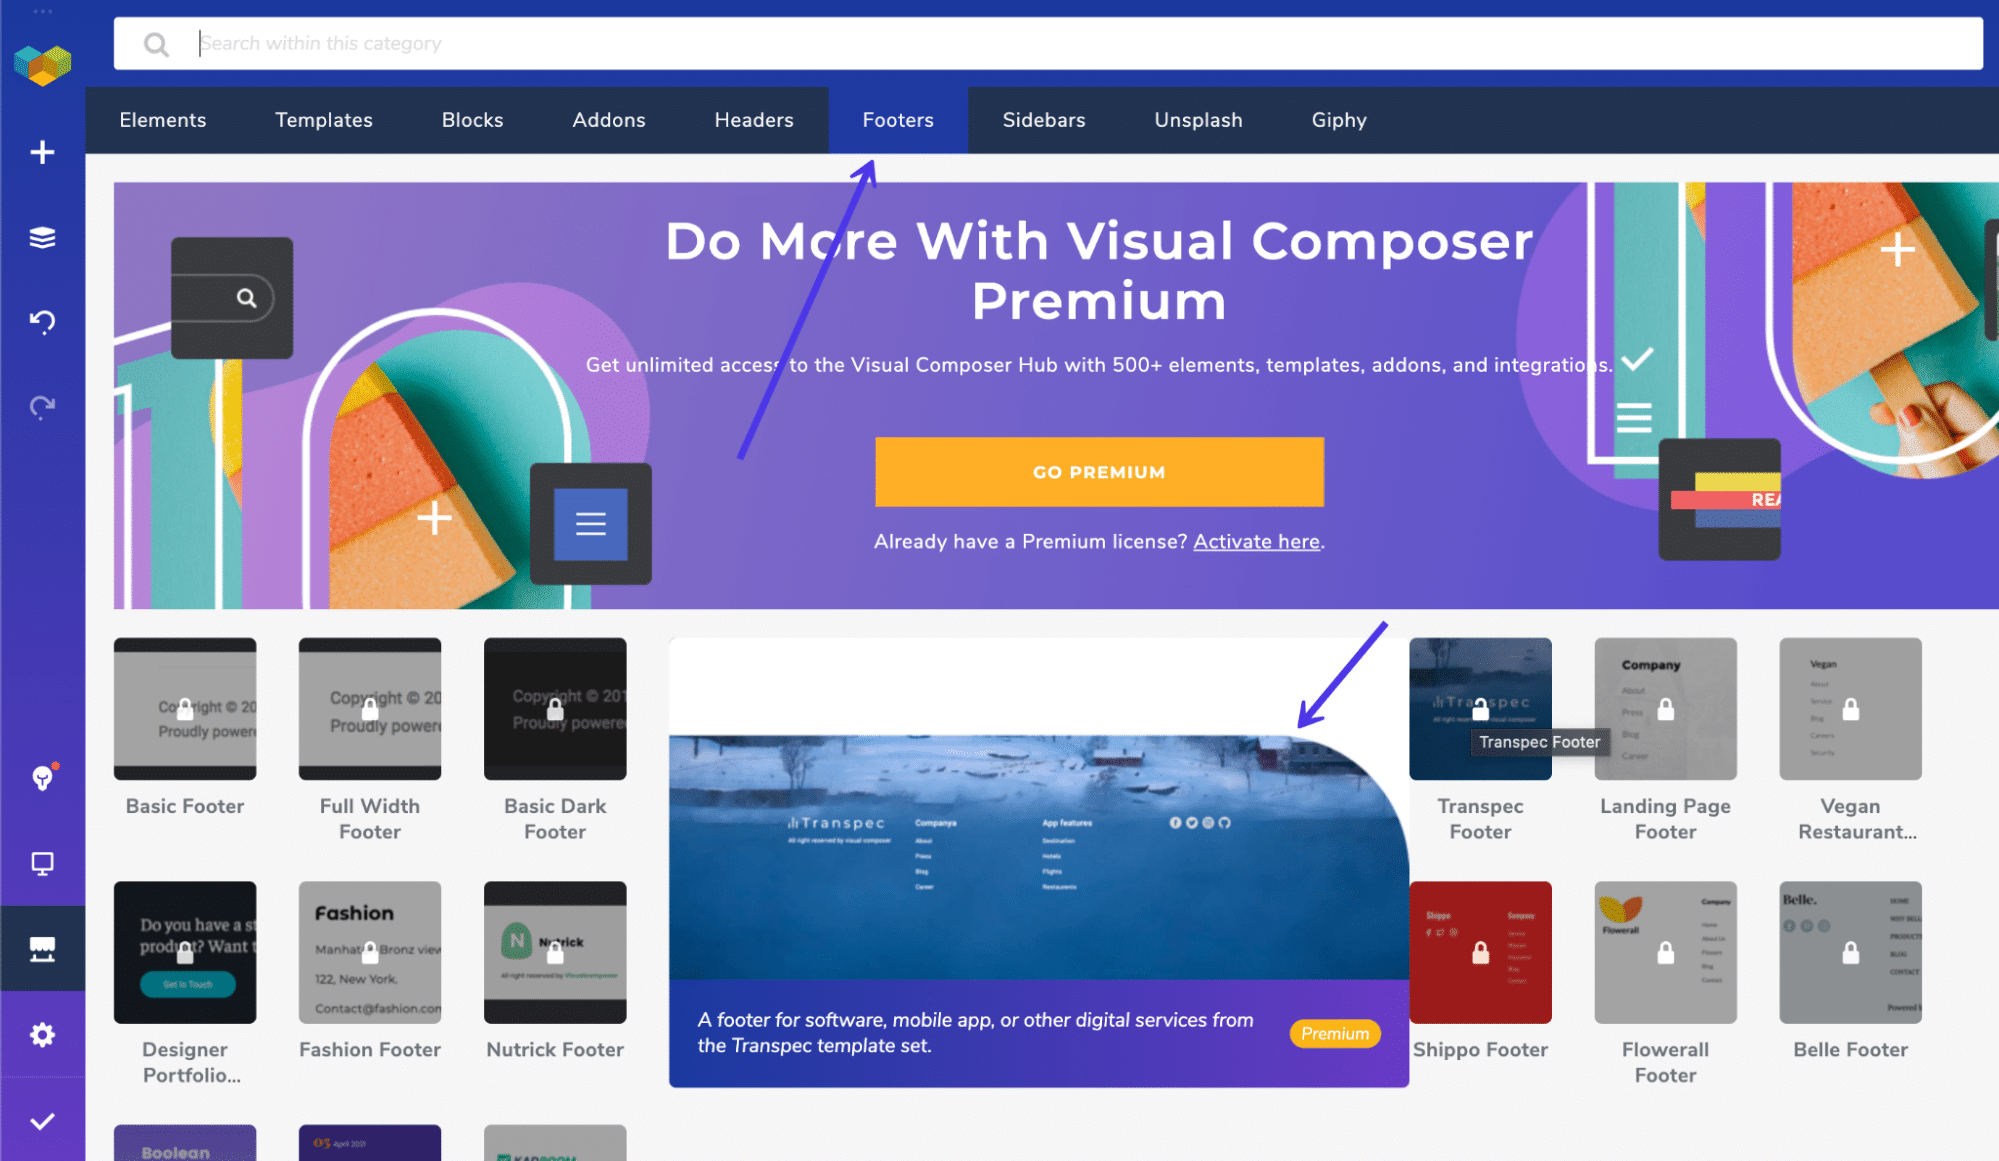 Sezione Footers in Visual Composer.